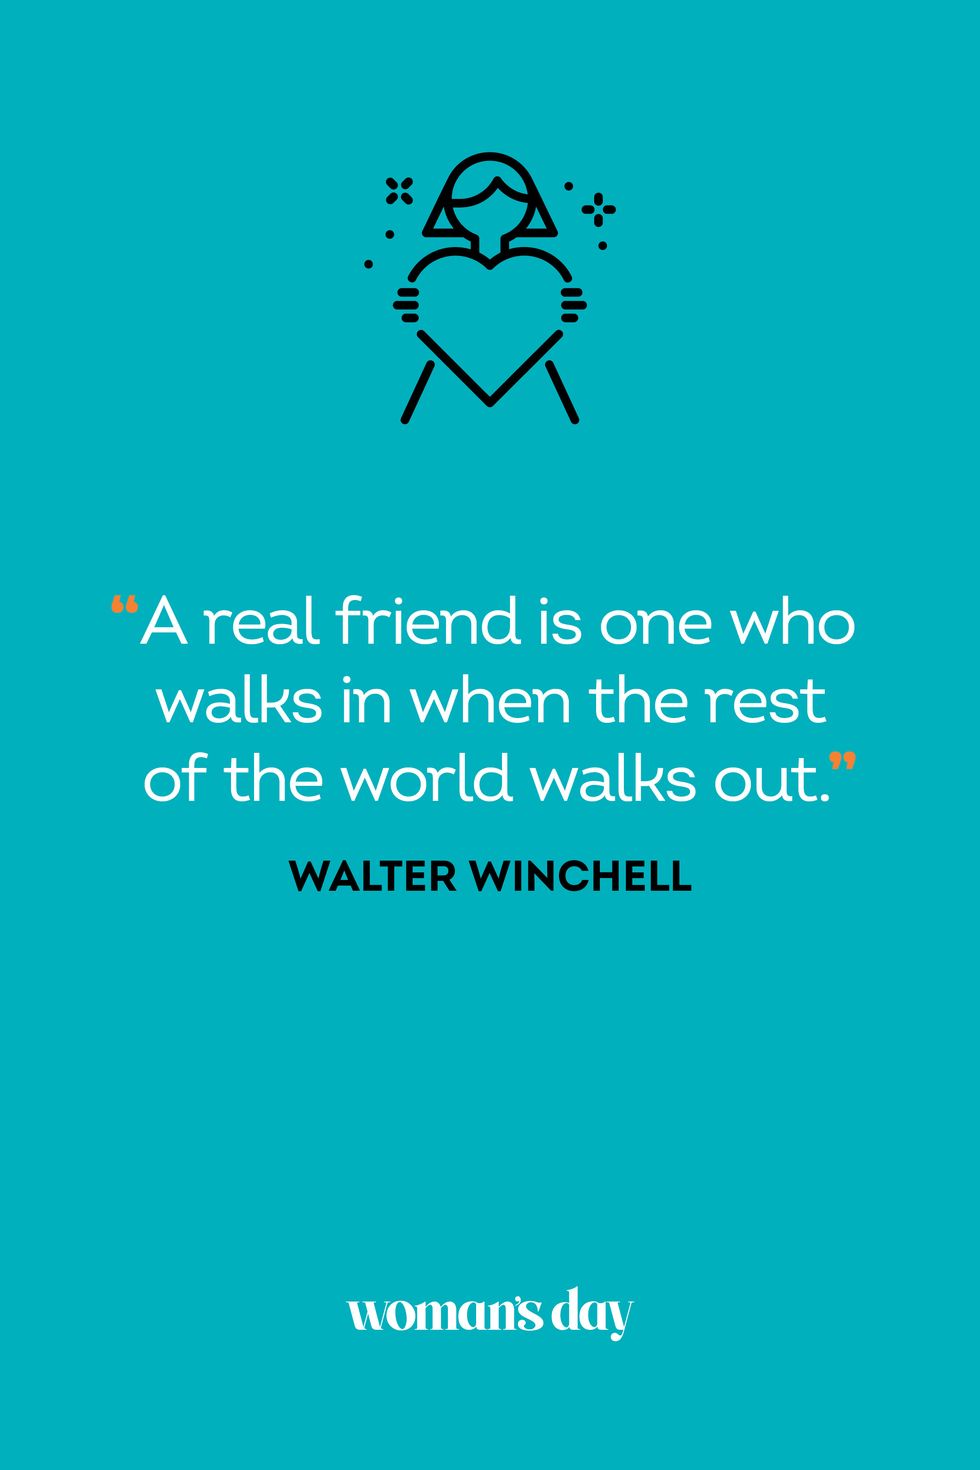 best friend quotes walter winchell